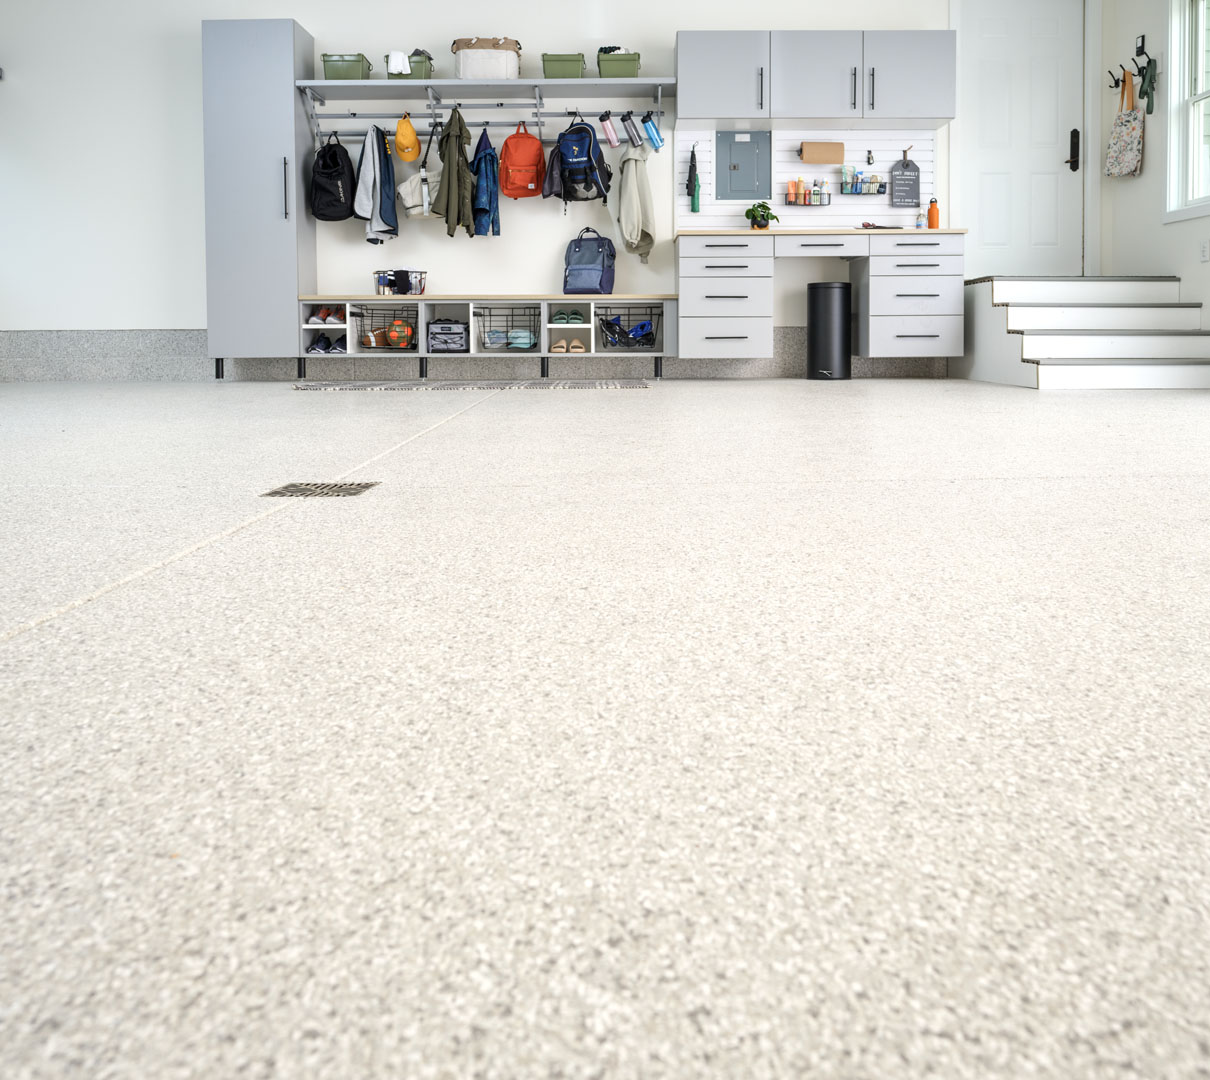 Considering an Epoxy Garage Floor? Read This First.